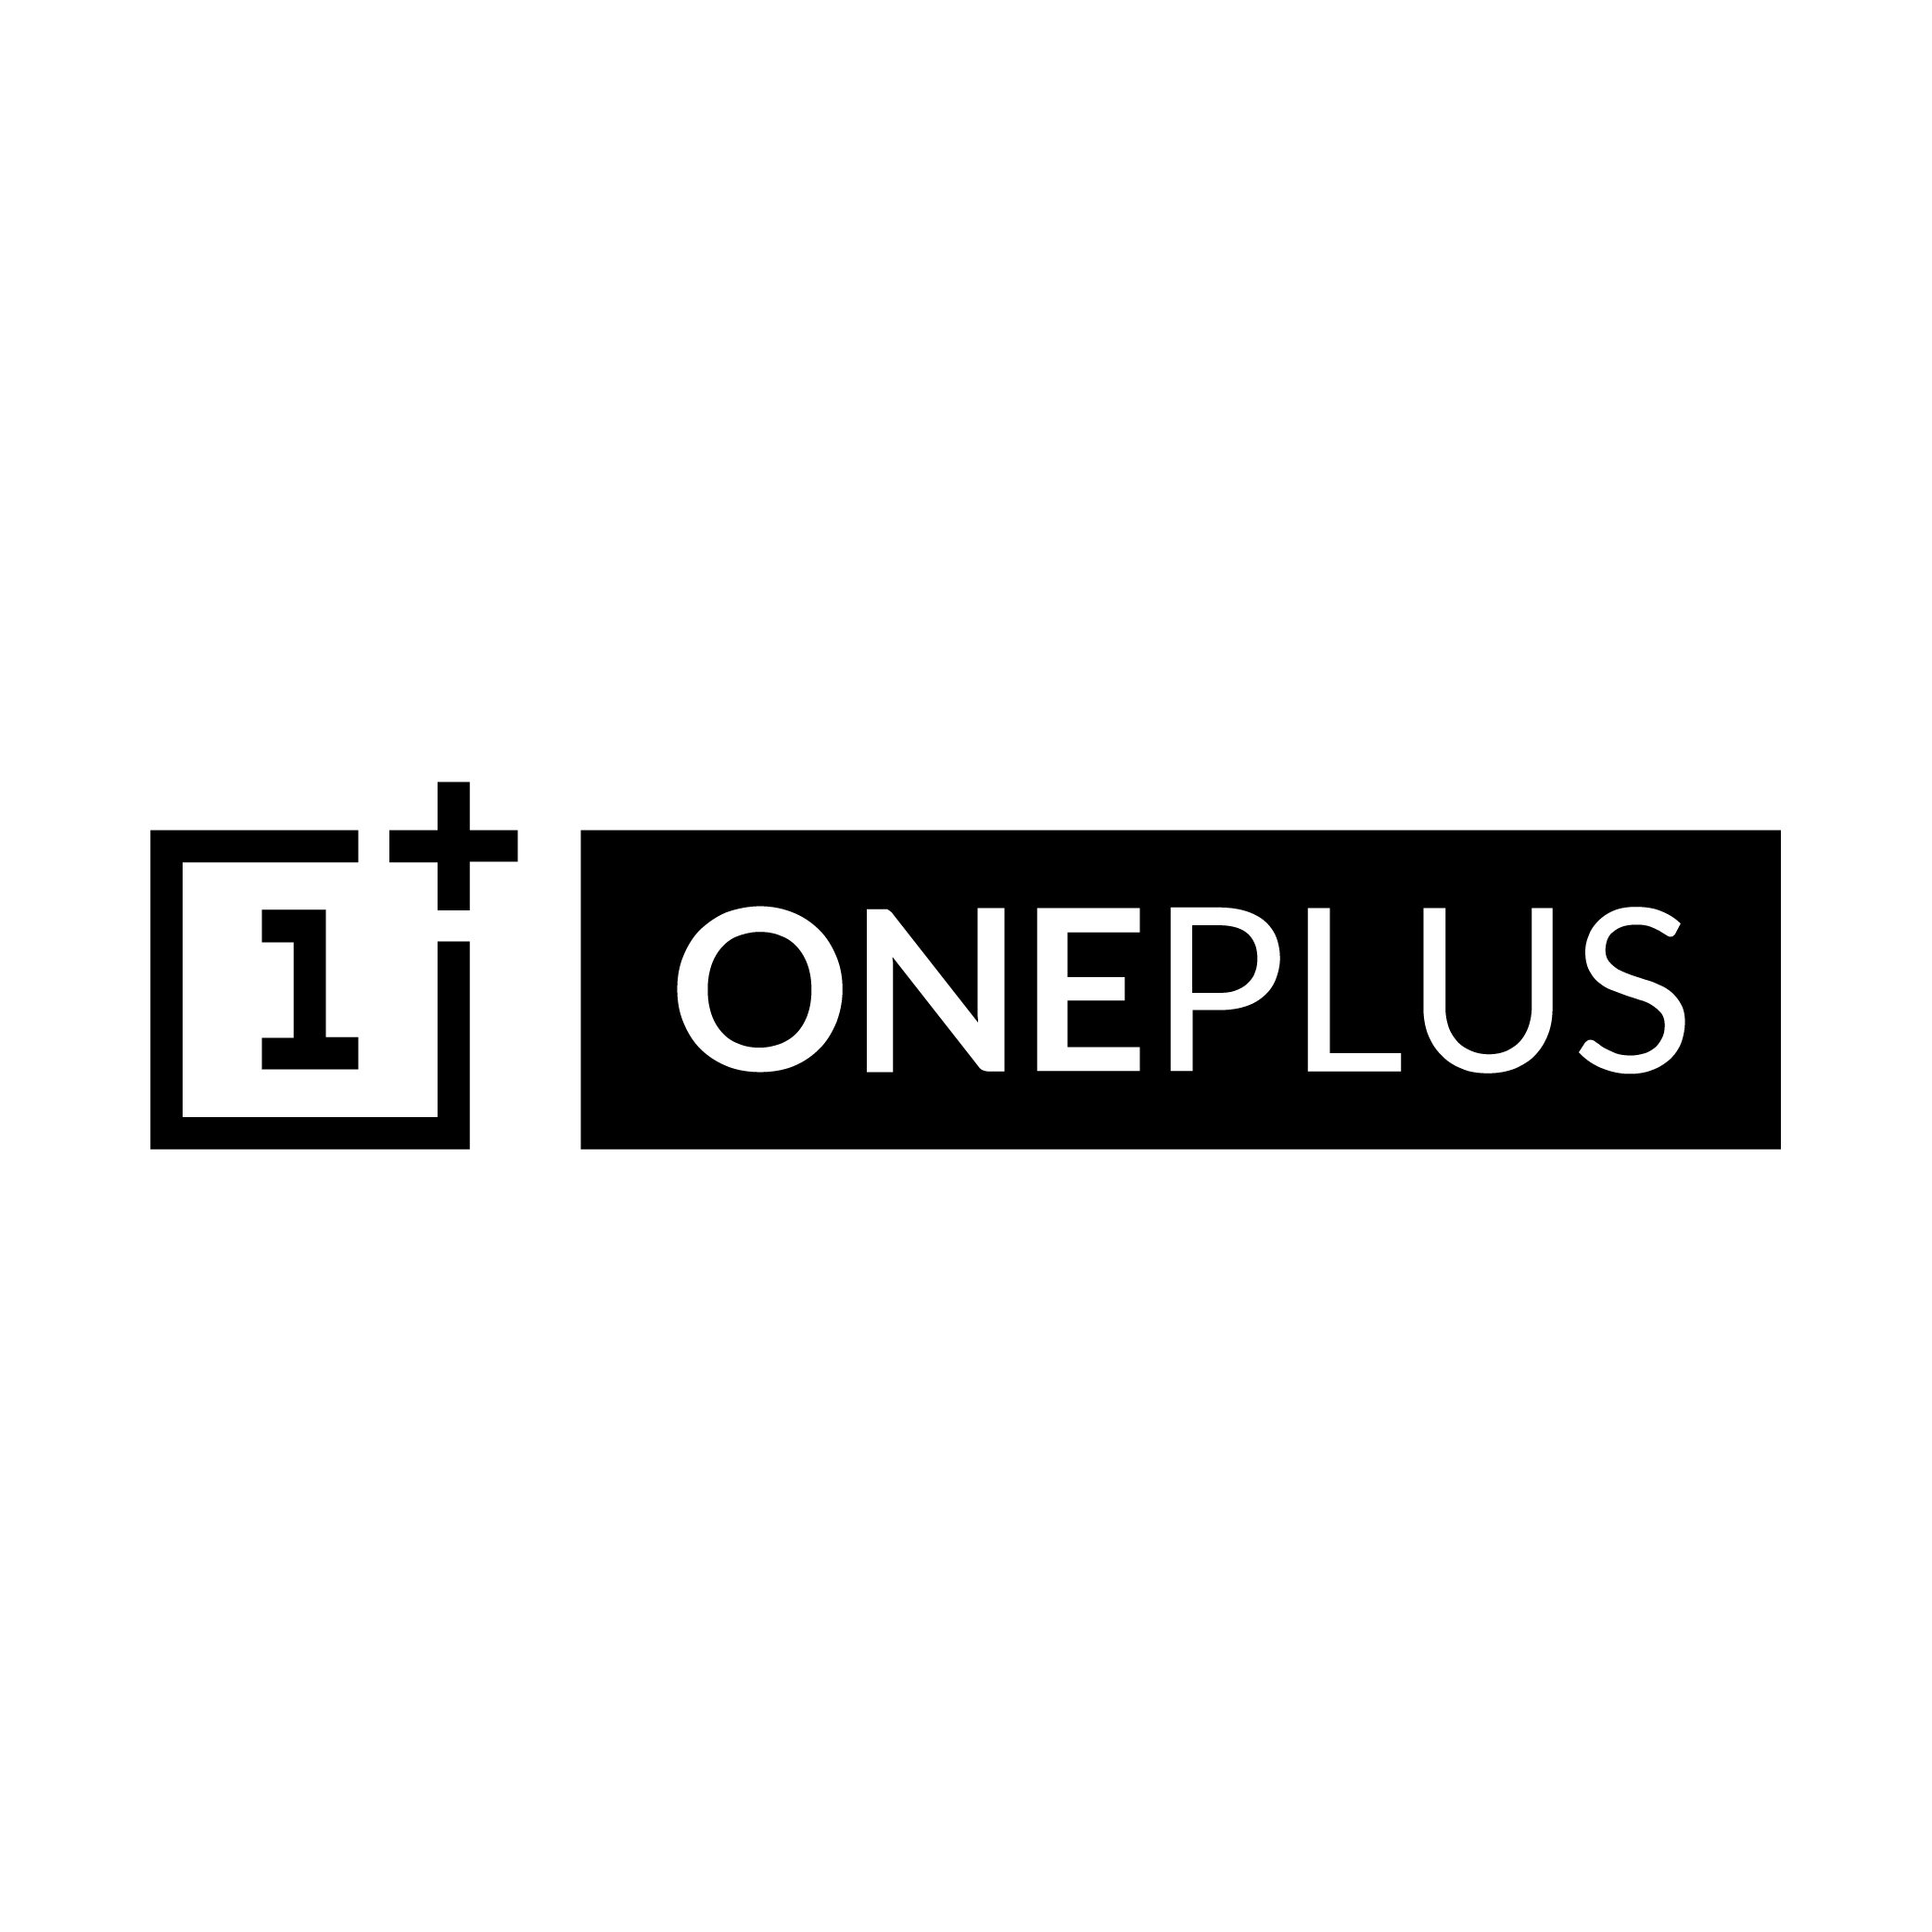 Flagship killers are back: OnePlus is rumored to be preparing smartphones  with flagship chips and prices under $400 | Gagadget.com